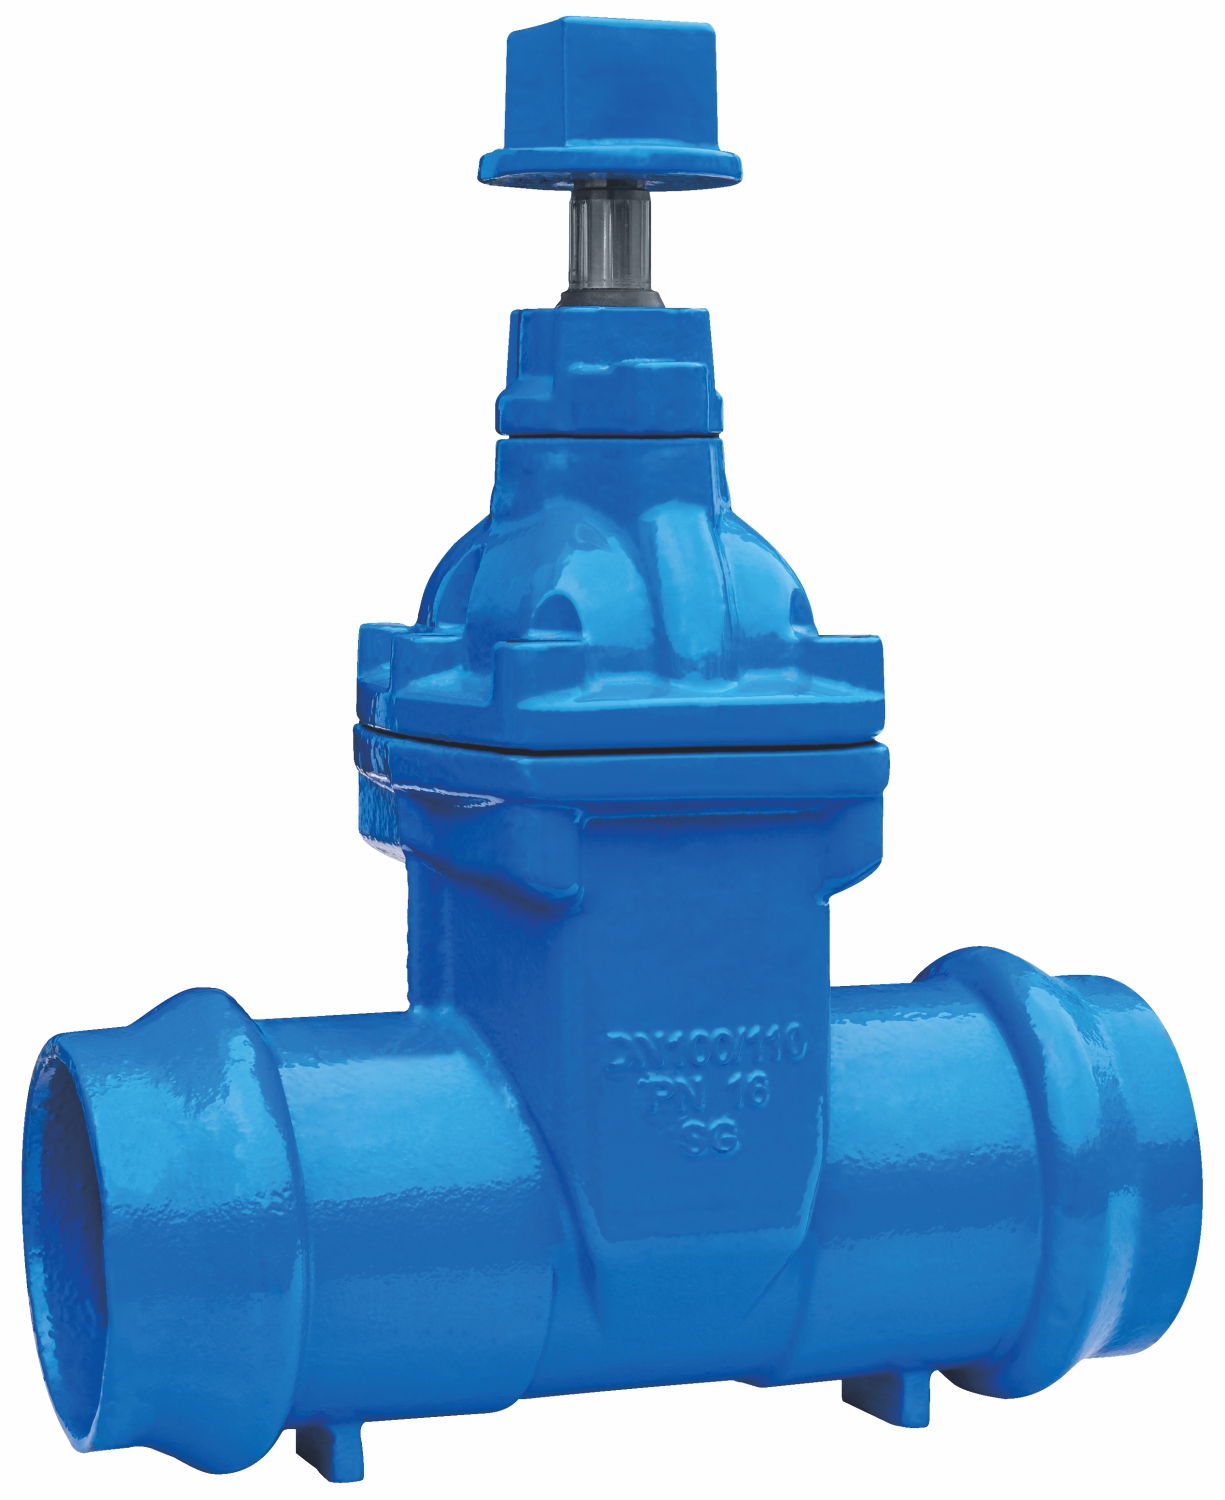 Double Socketted NRS Resilient Seated Gate Valve